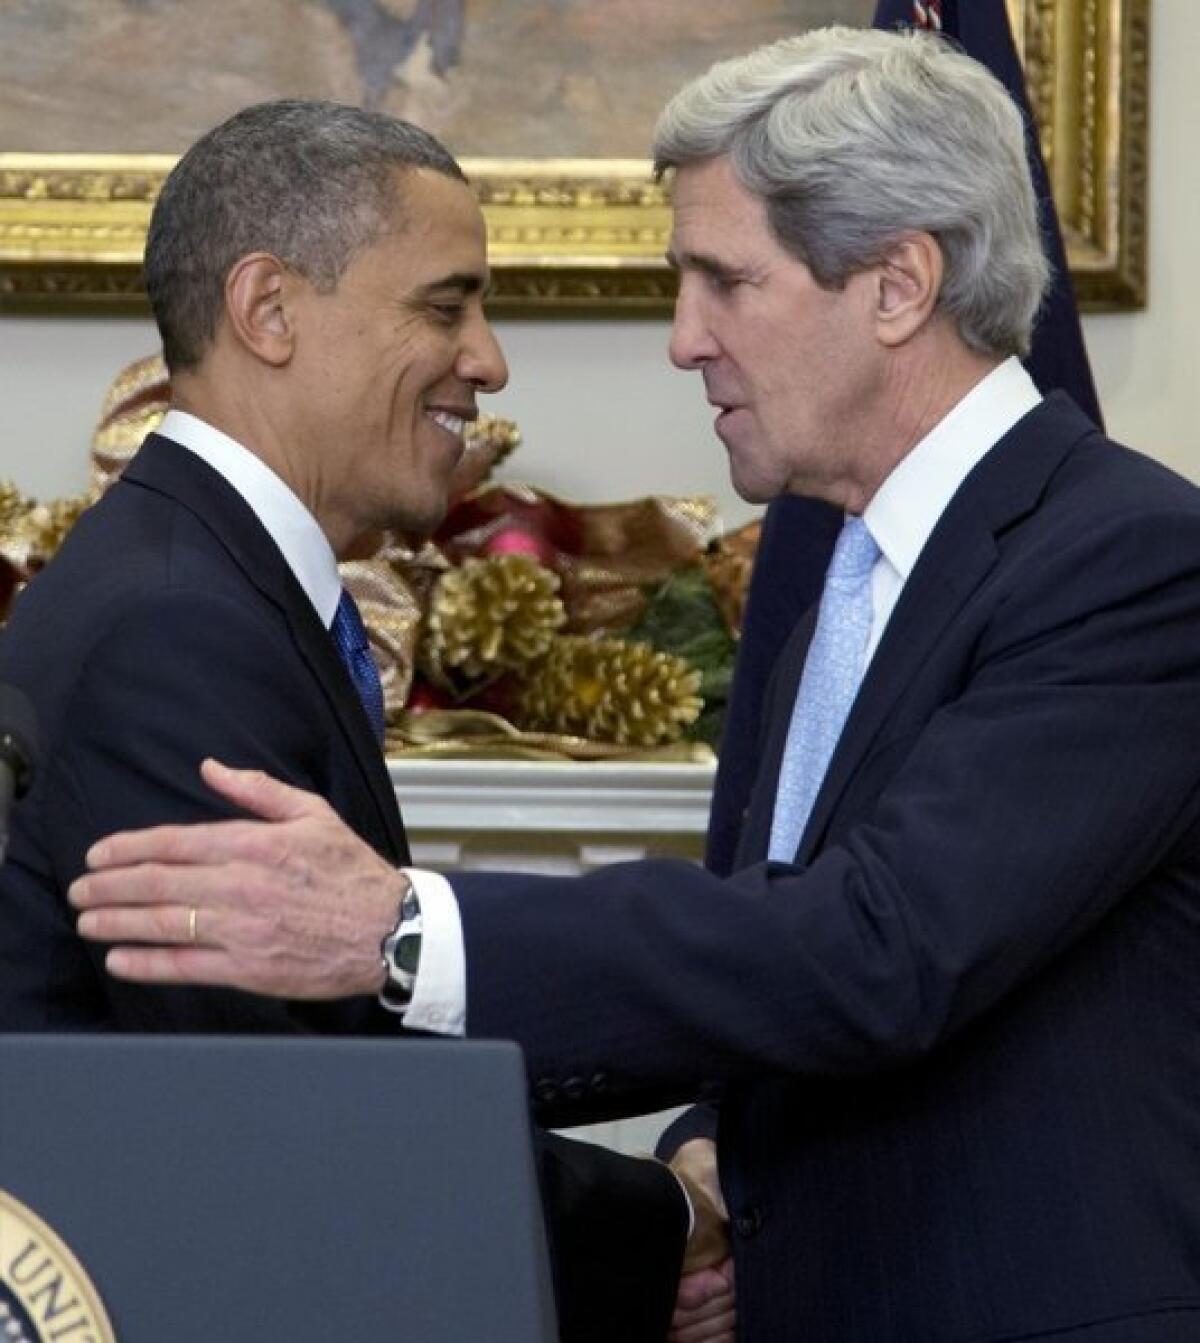 President Obama has nominated Sen. John Kerry (D-Mass.) to become the next secretary of State.